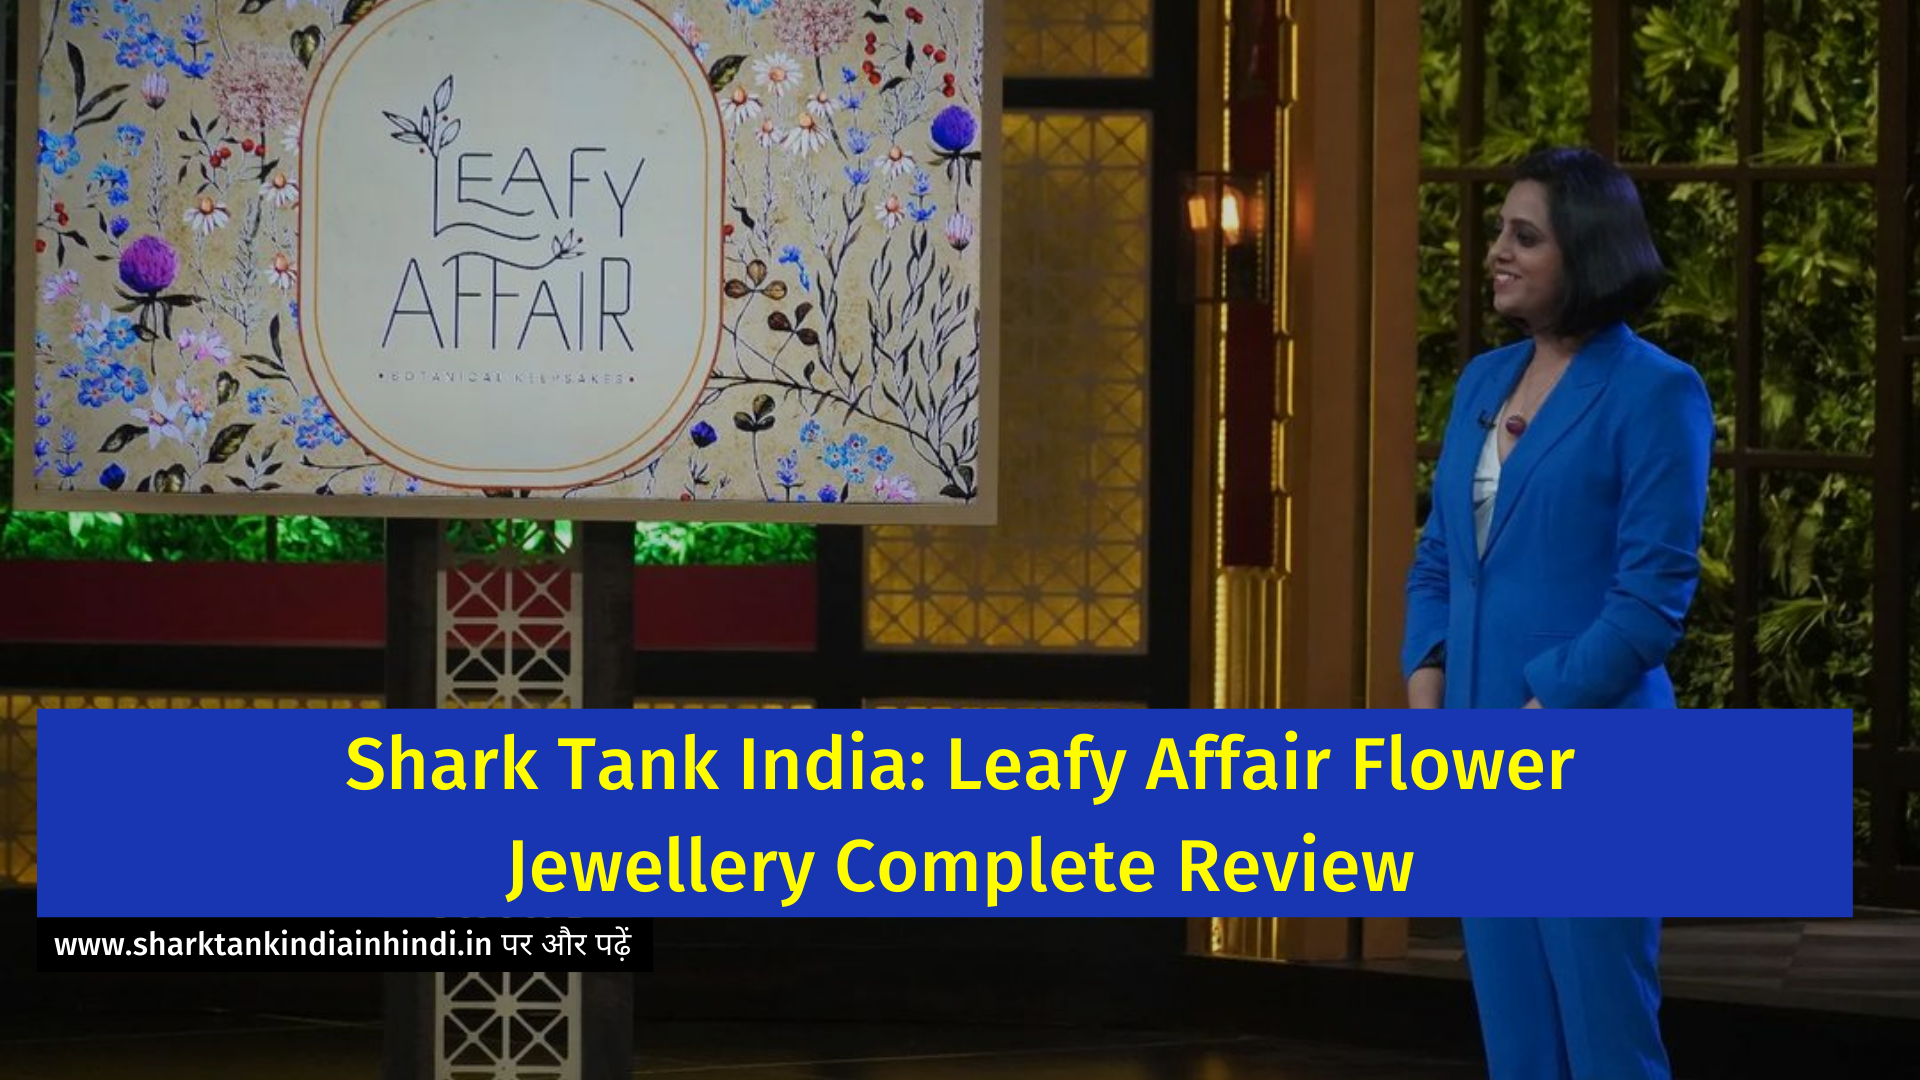 Shark Tank India: Leafy Affair Flower Jewellery Complete Review